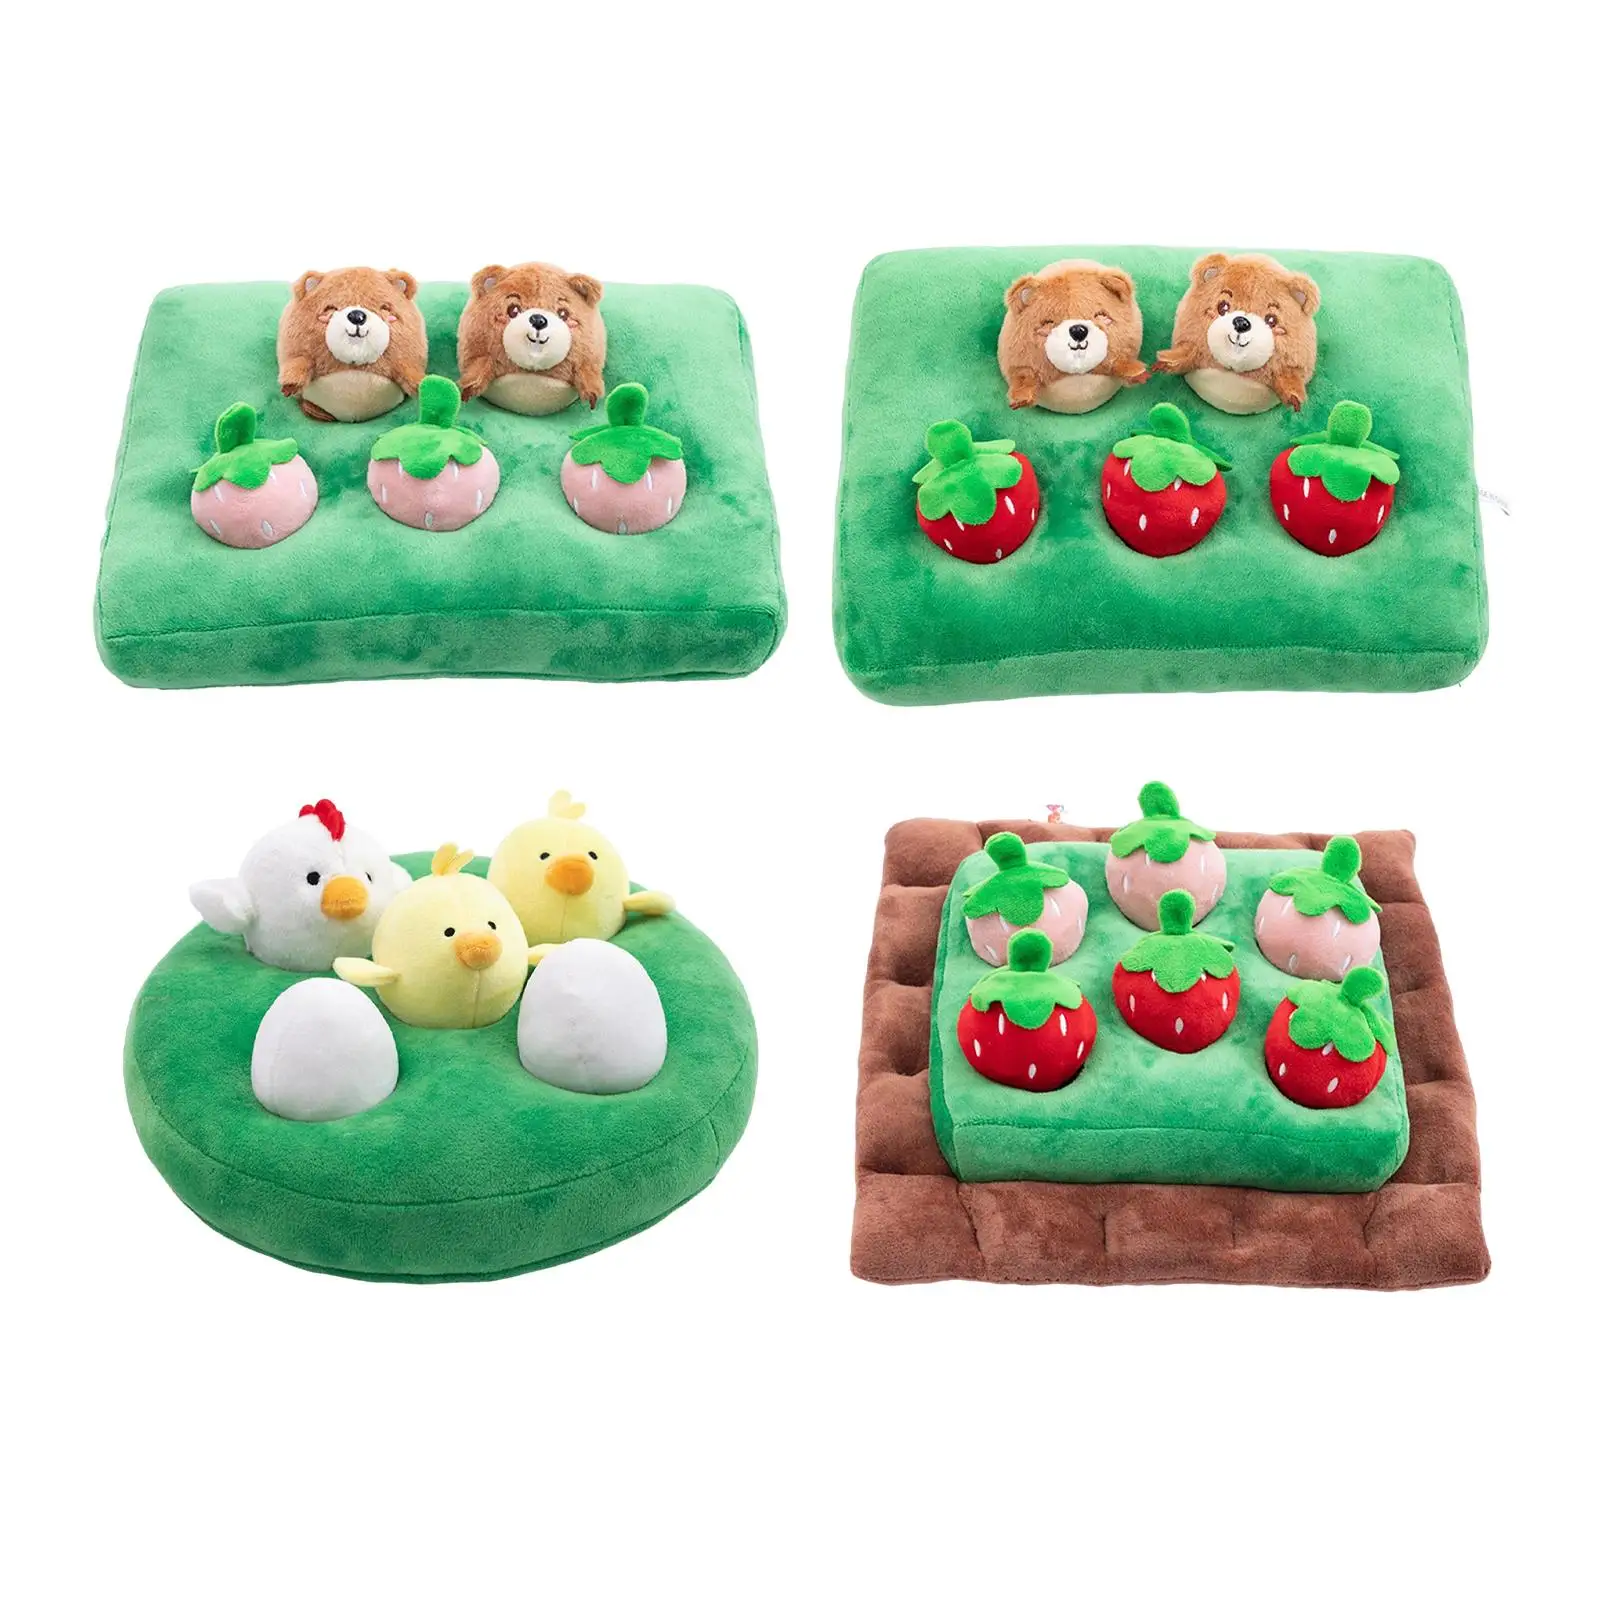 Puzzle Toys Stuffed Sorting Funny Plush Toy for Birthday Gifts Girls Boys